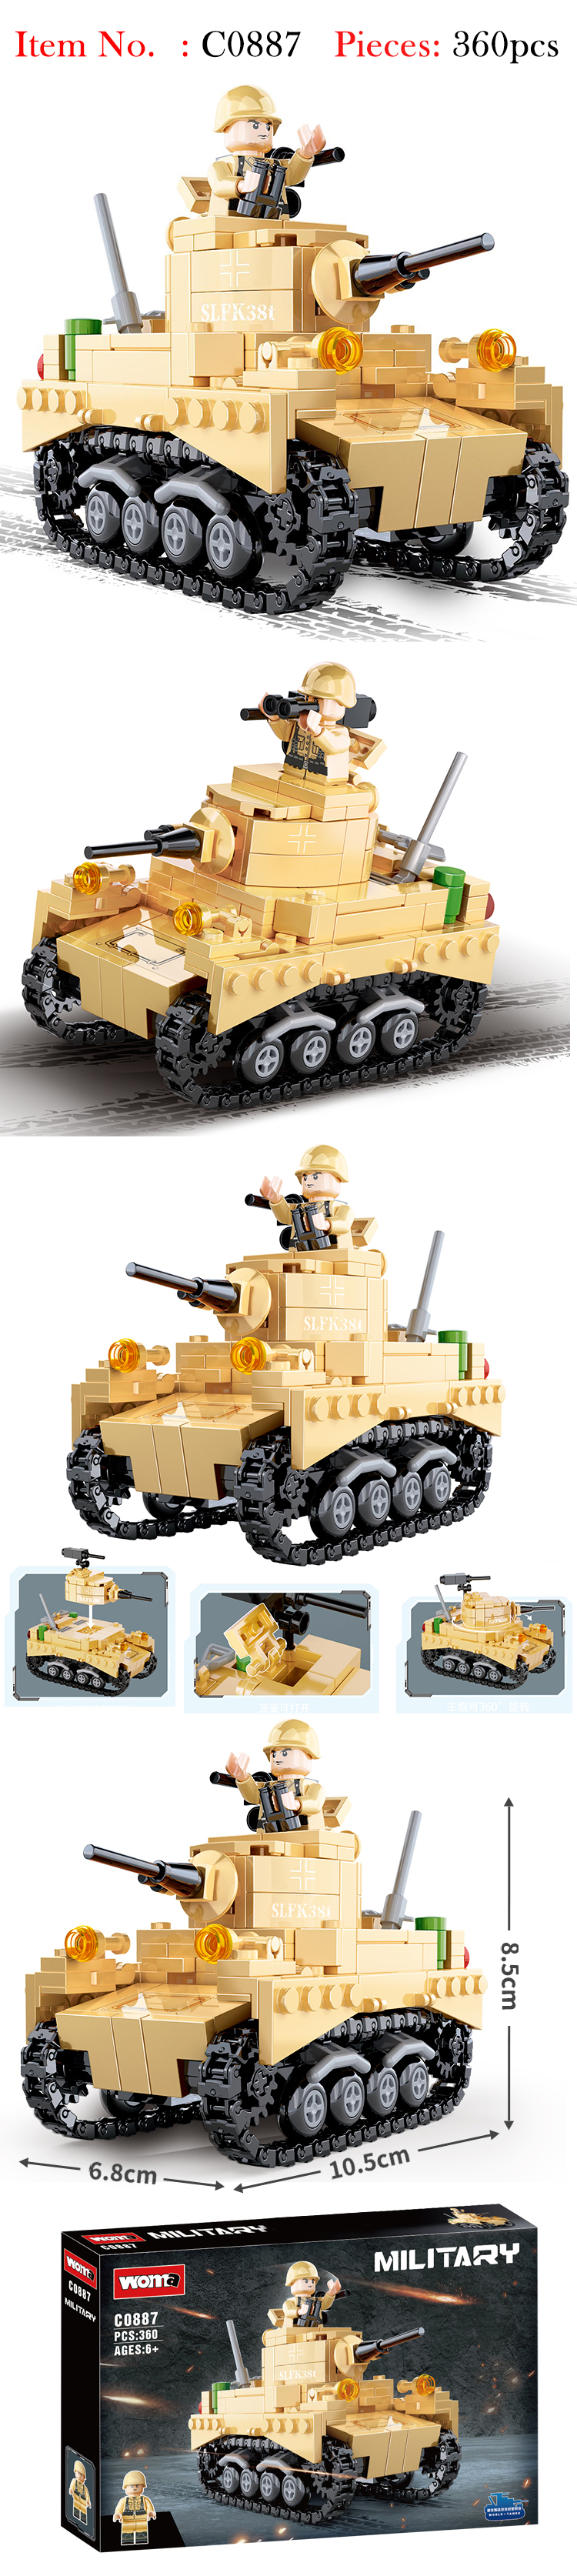 WOMA TOYS best selling Military WW1 Main Battle simple tank other educational toys vehicle building blocks Custom Set jouet